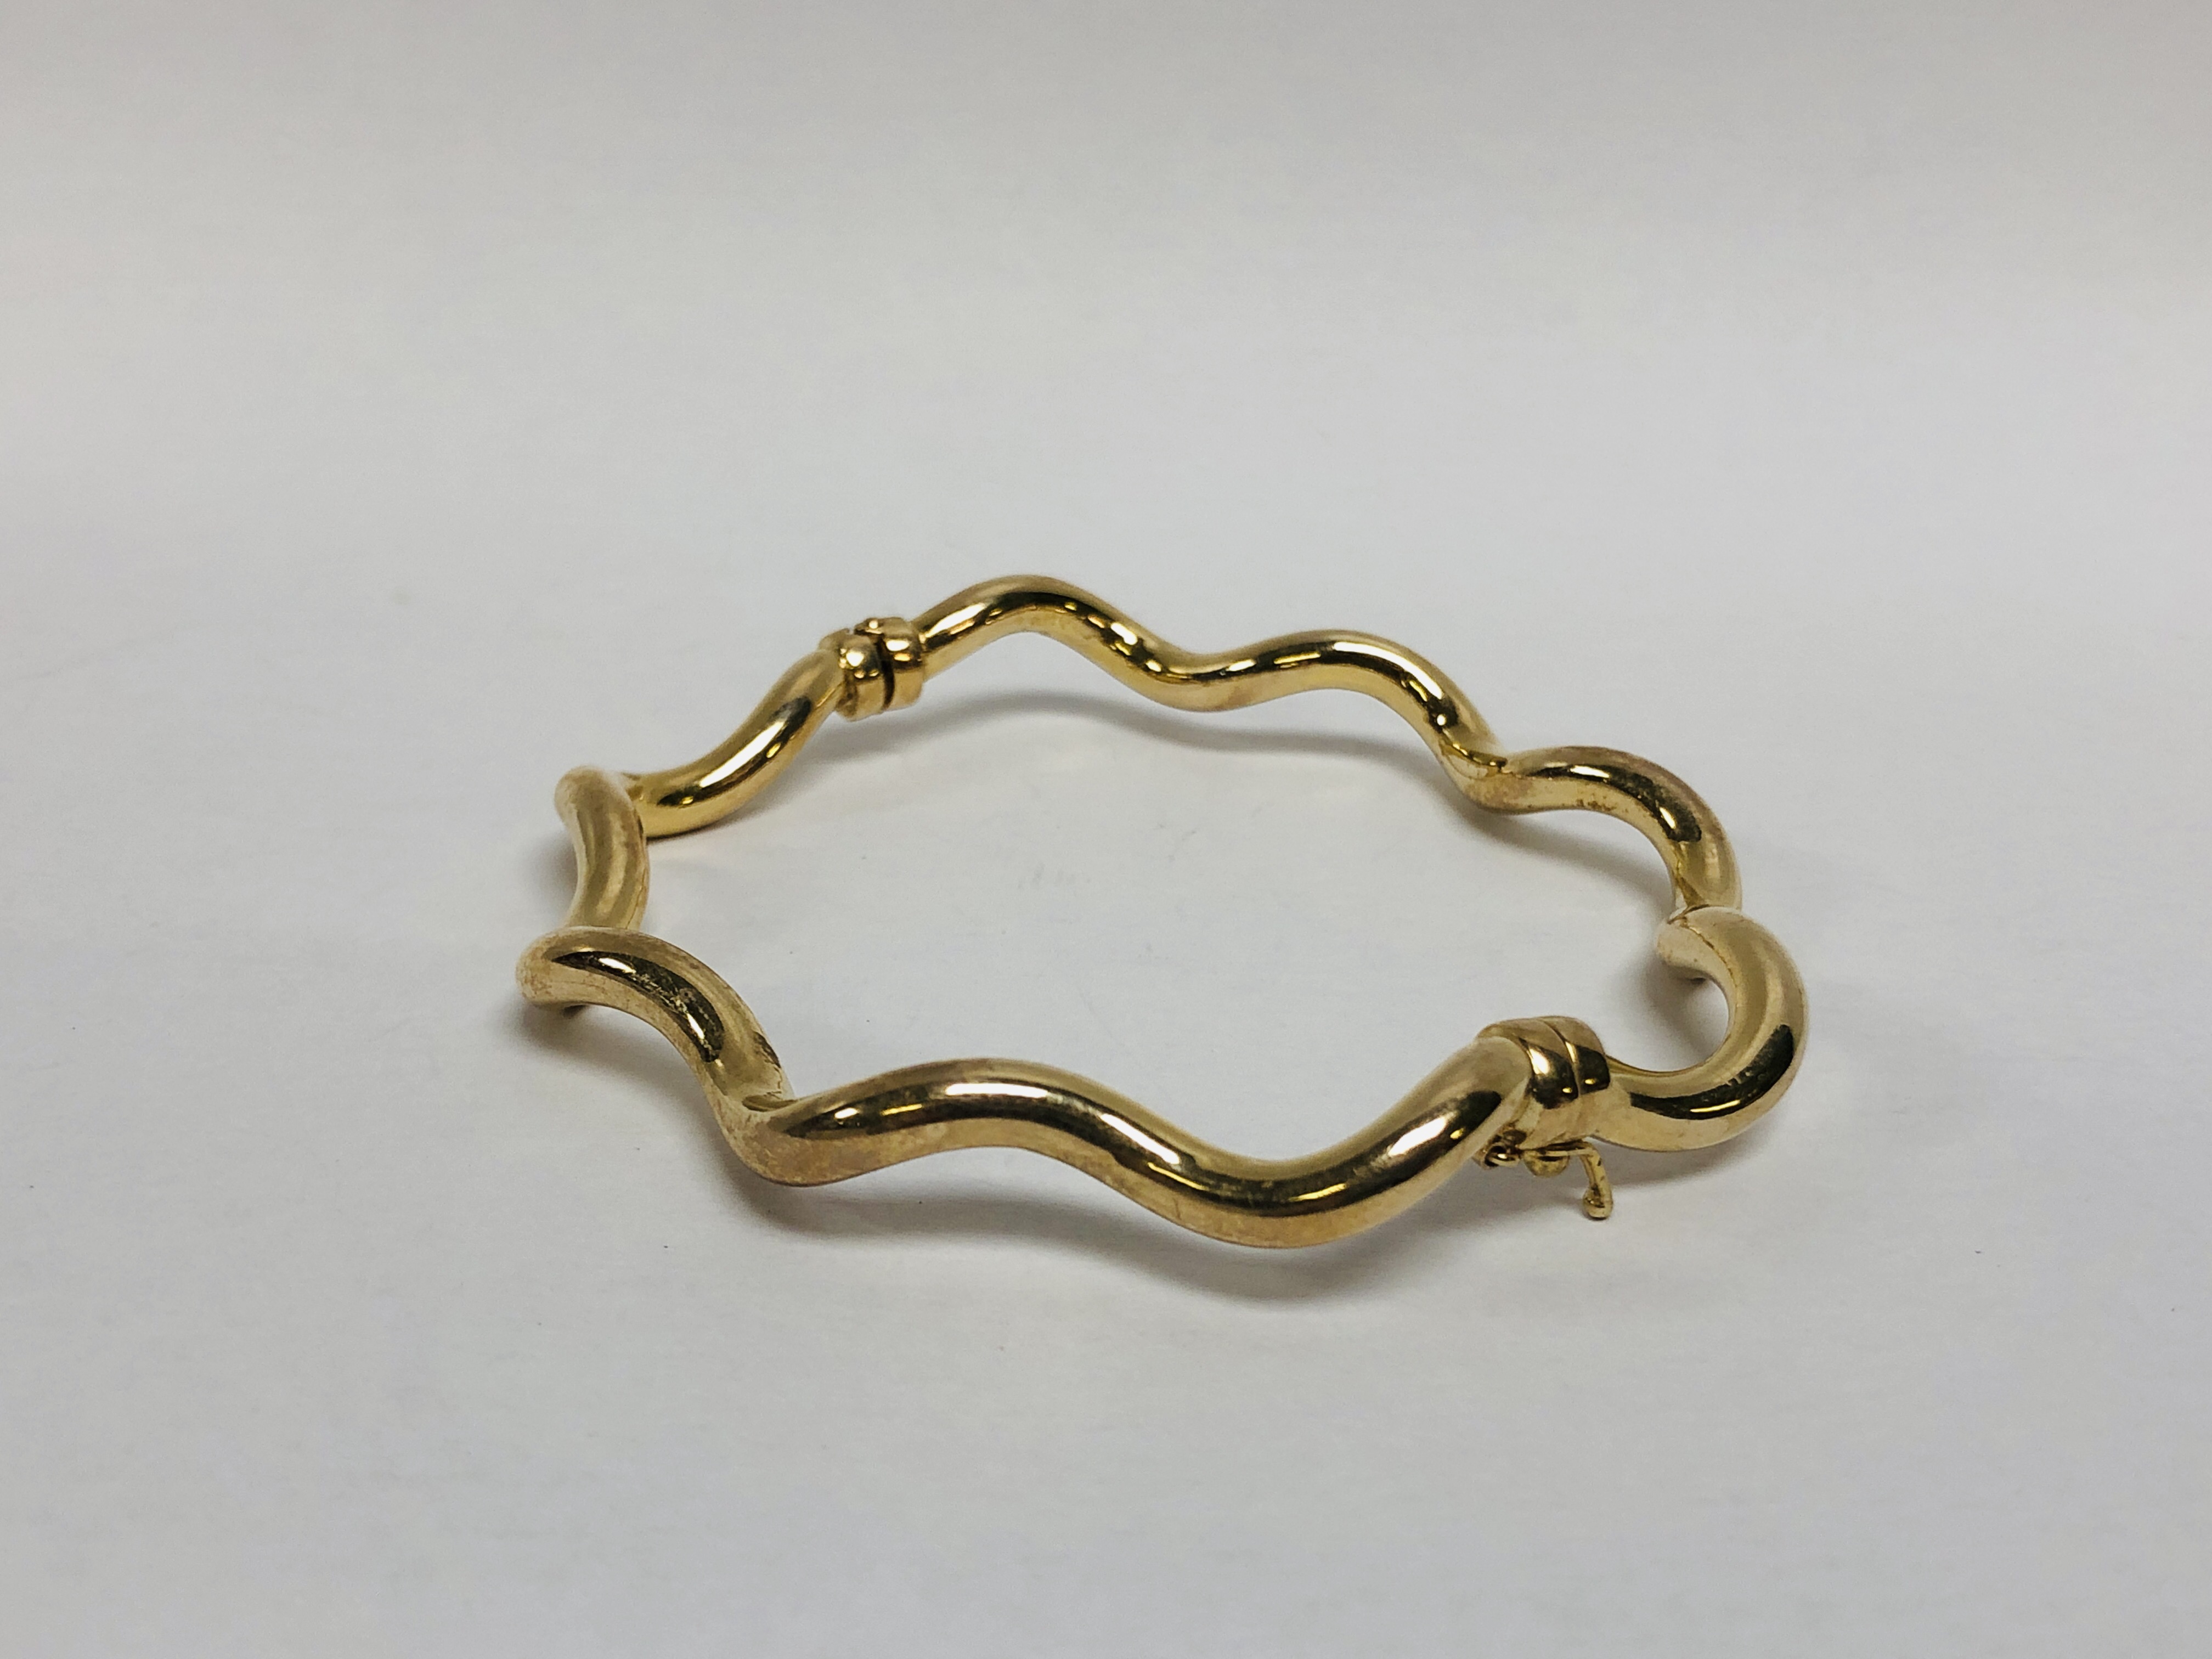 9CT GOLD BANGLE WITH SAFETY CATCH - Image 6 of 7